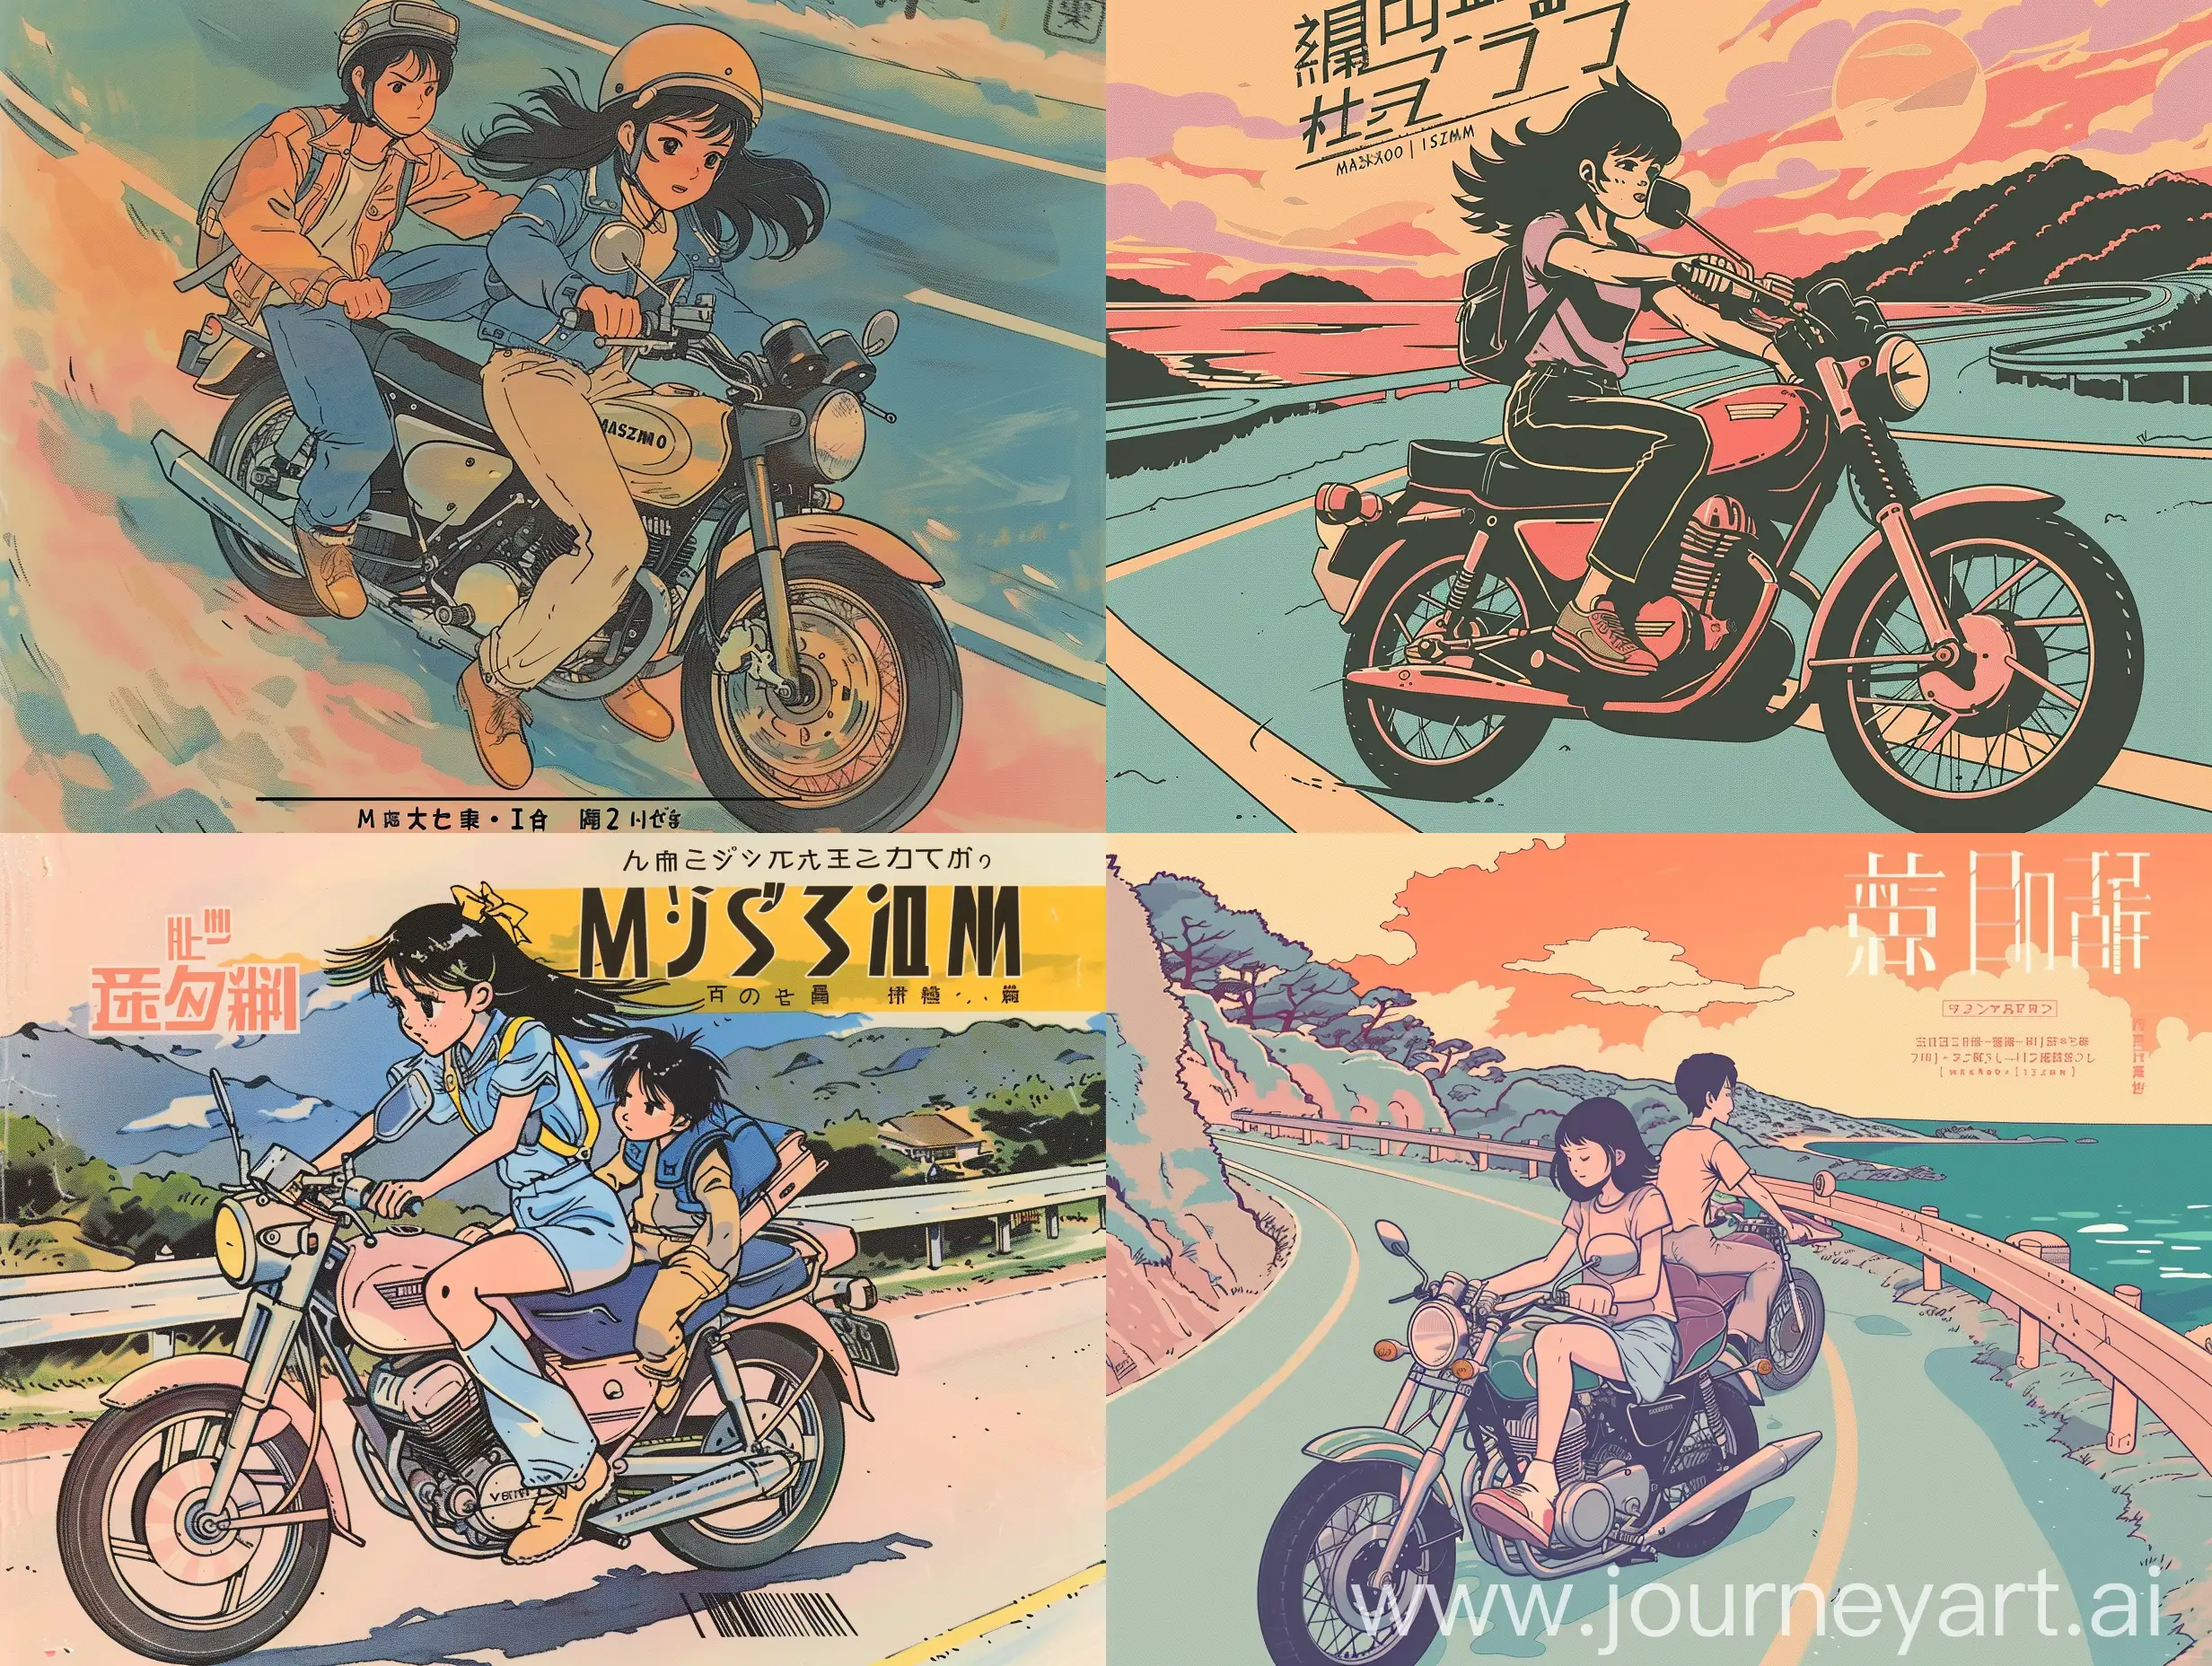 Retro-Manga-Style-Girl-and-Boy-Riding-Motorcycle-in-Pastel-Colors